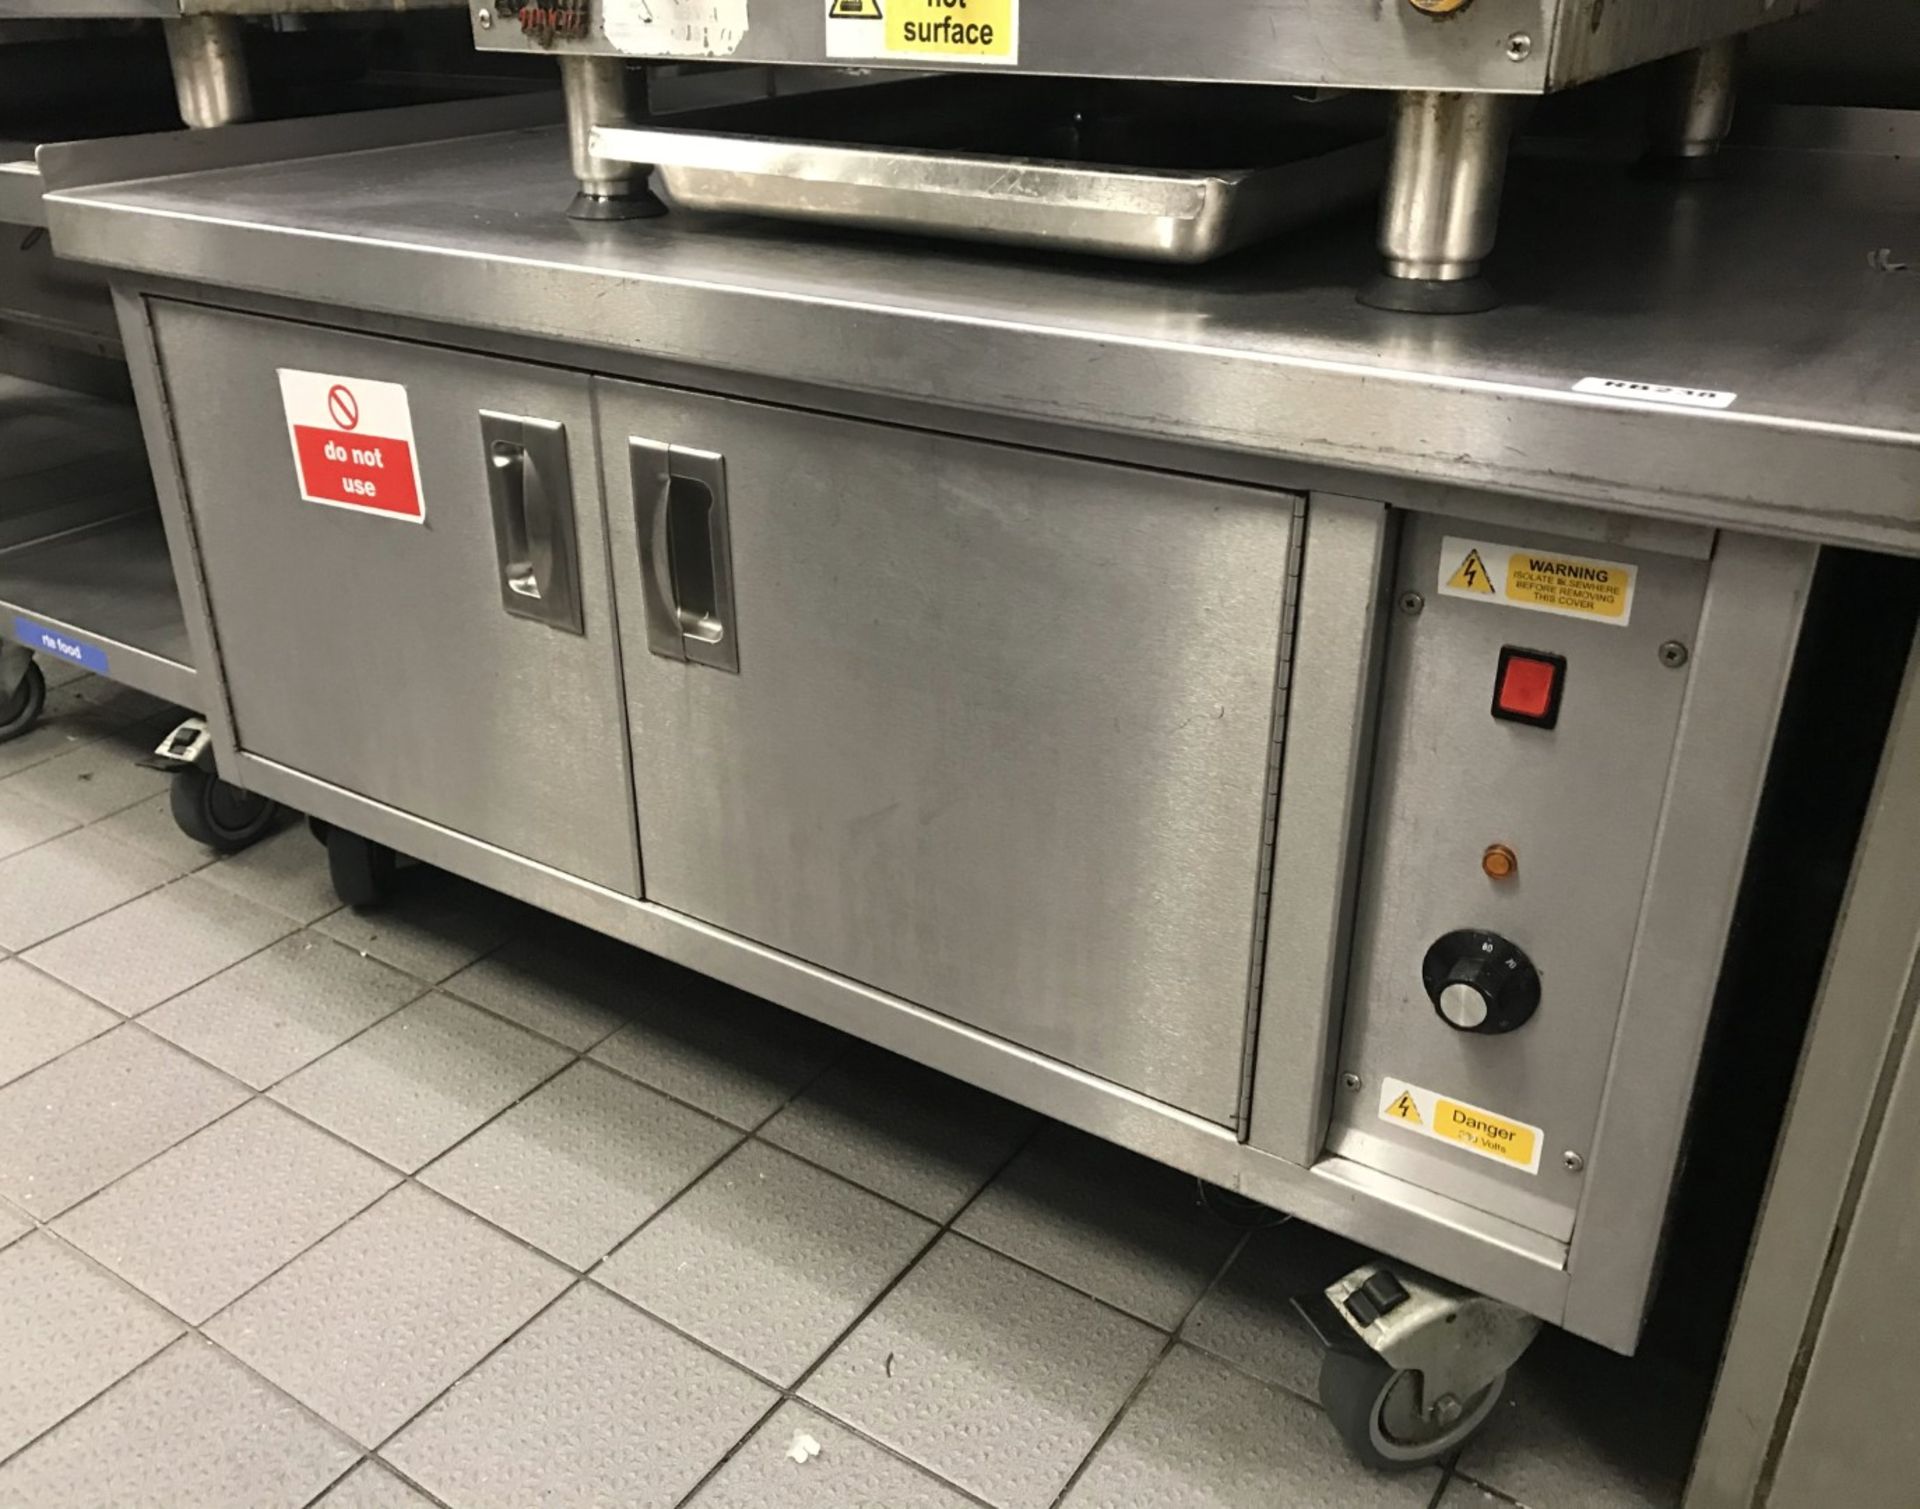 1 x Stainless Steel Commercial Hot Cabinet For Warming Plates or Food - Approx Size L120 x D80 cms -